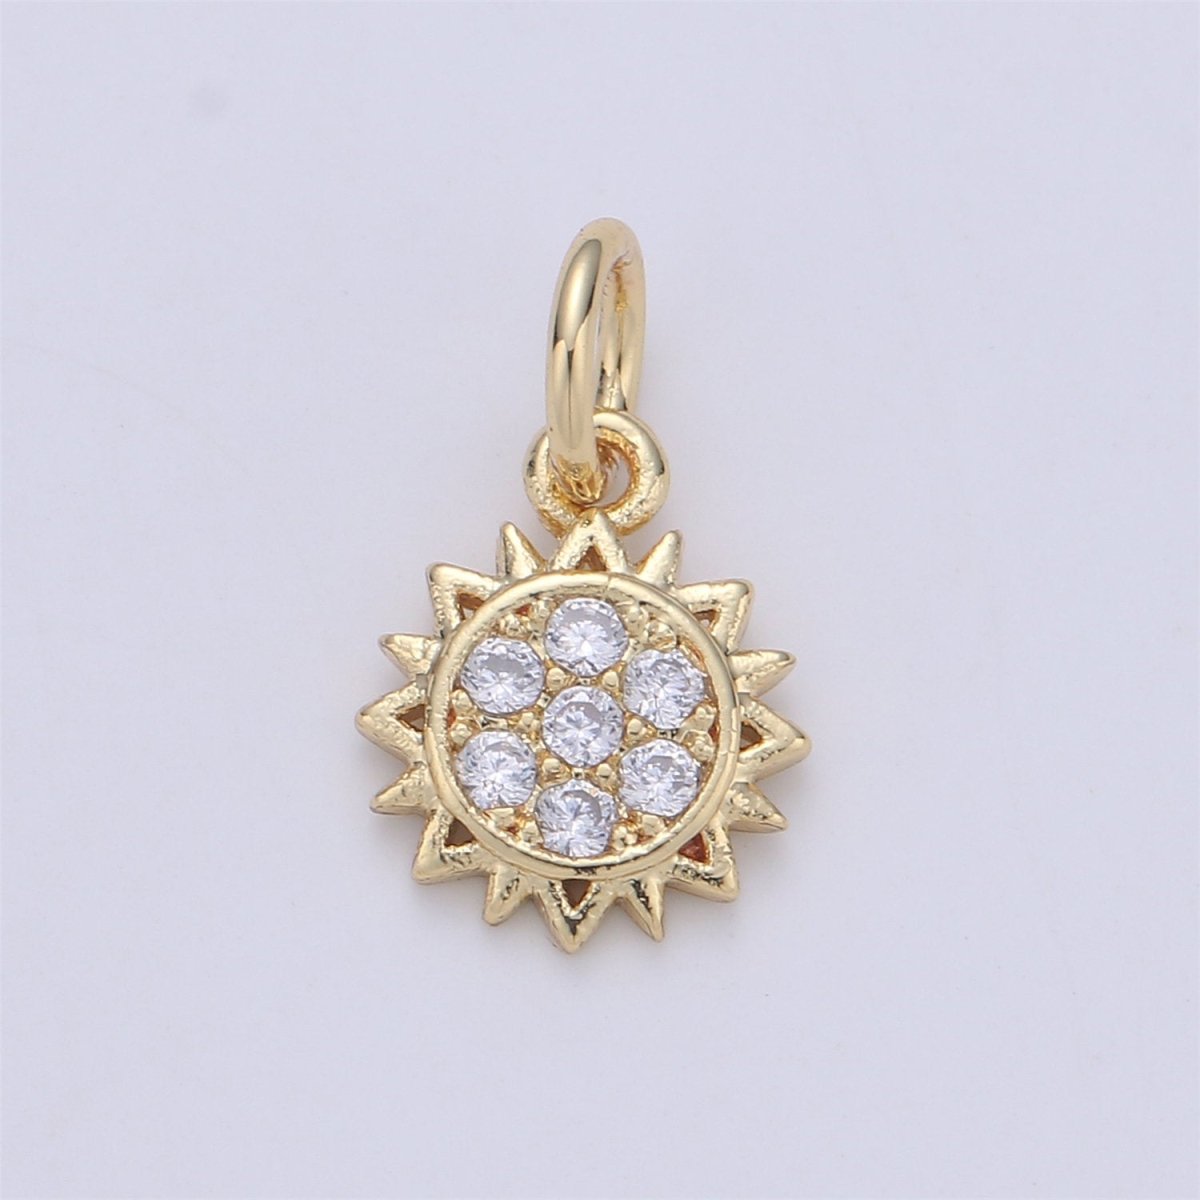 24K Gold Filled Sunflower Sun Flower Charm with Micro Pave Cubic Zirconia CZ Stone for Necklace Bracelet or Earrings, C-894 - DLUXCA